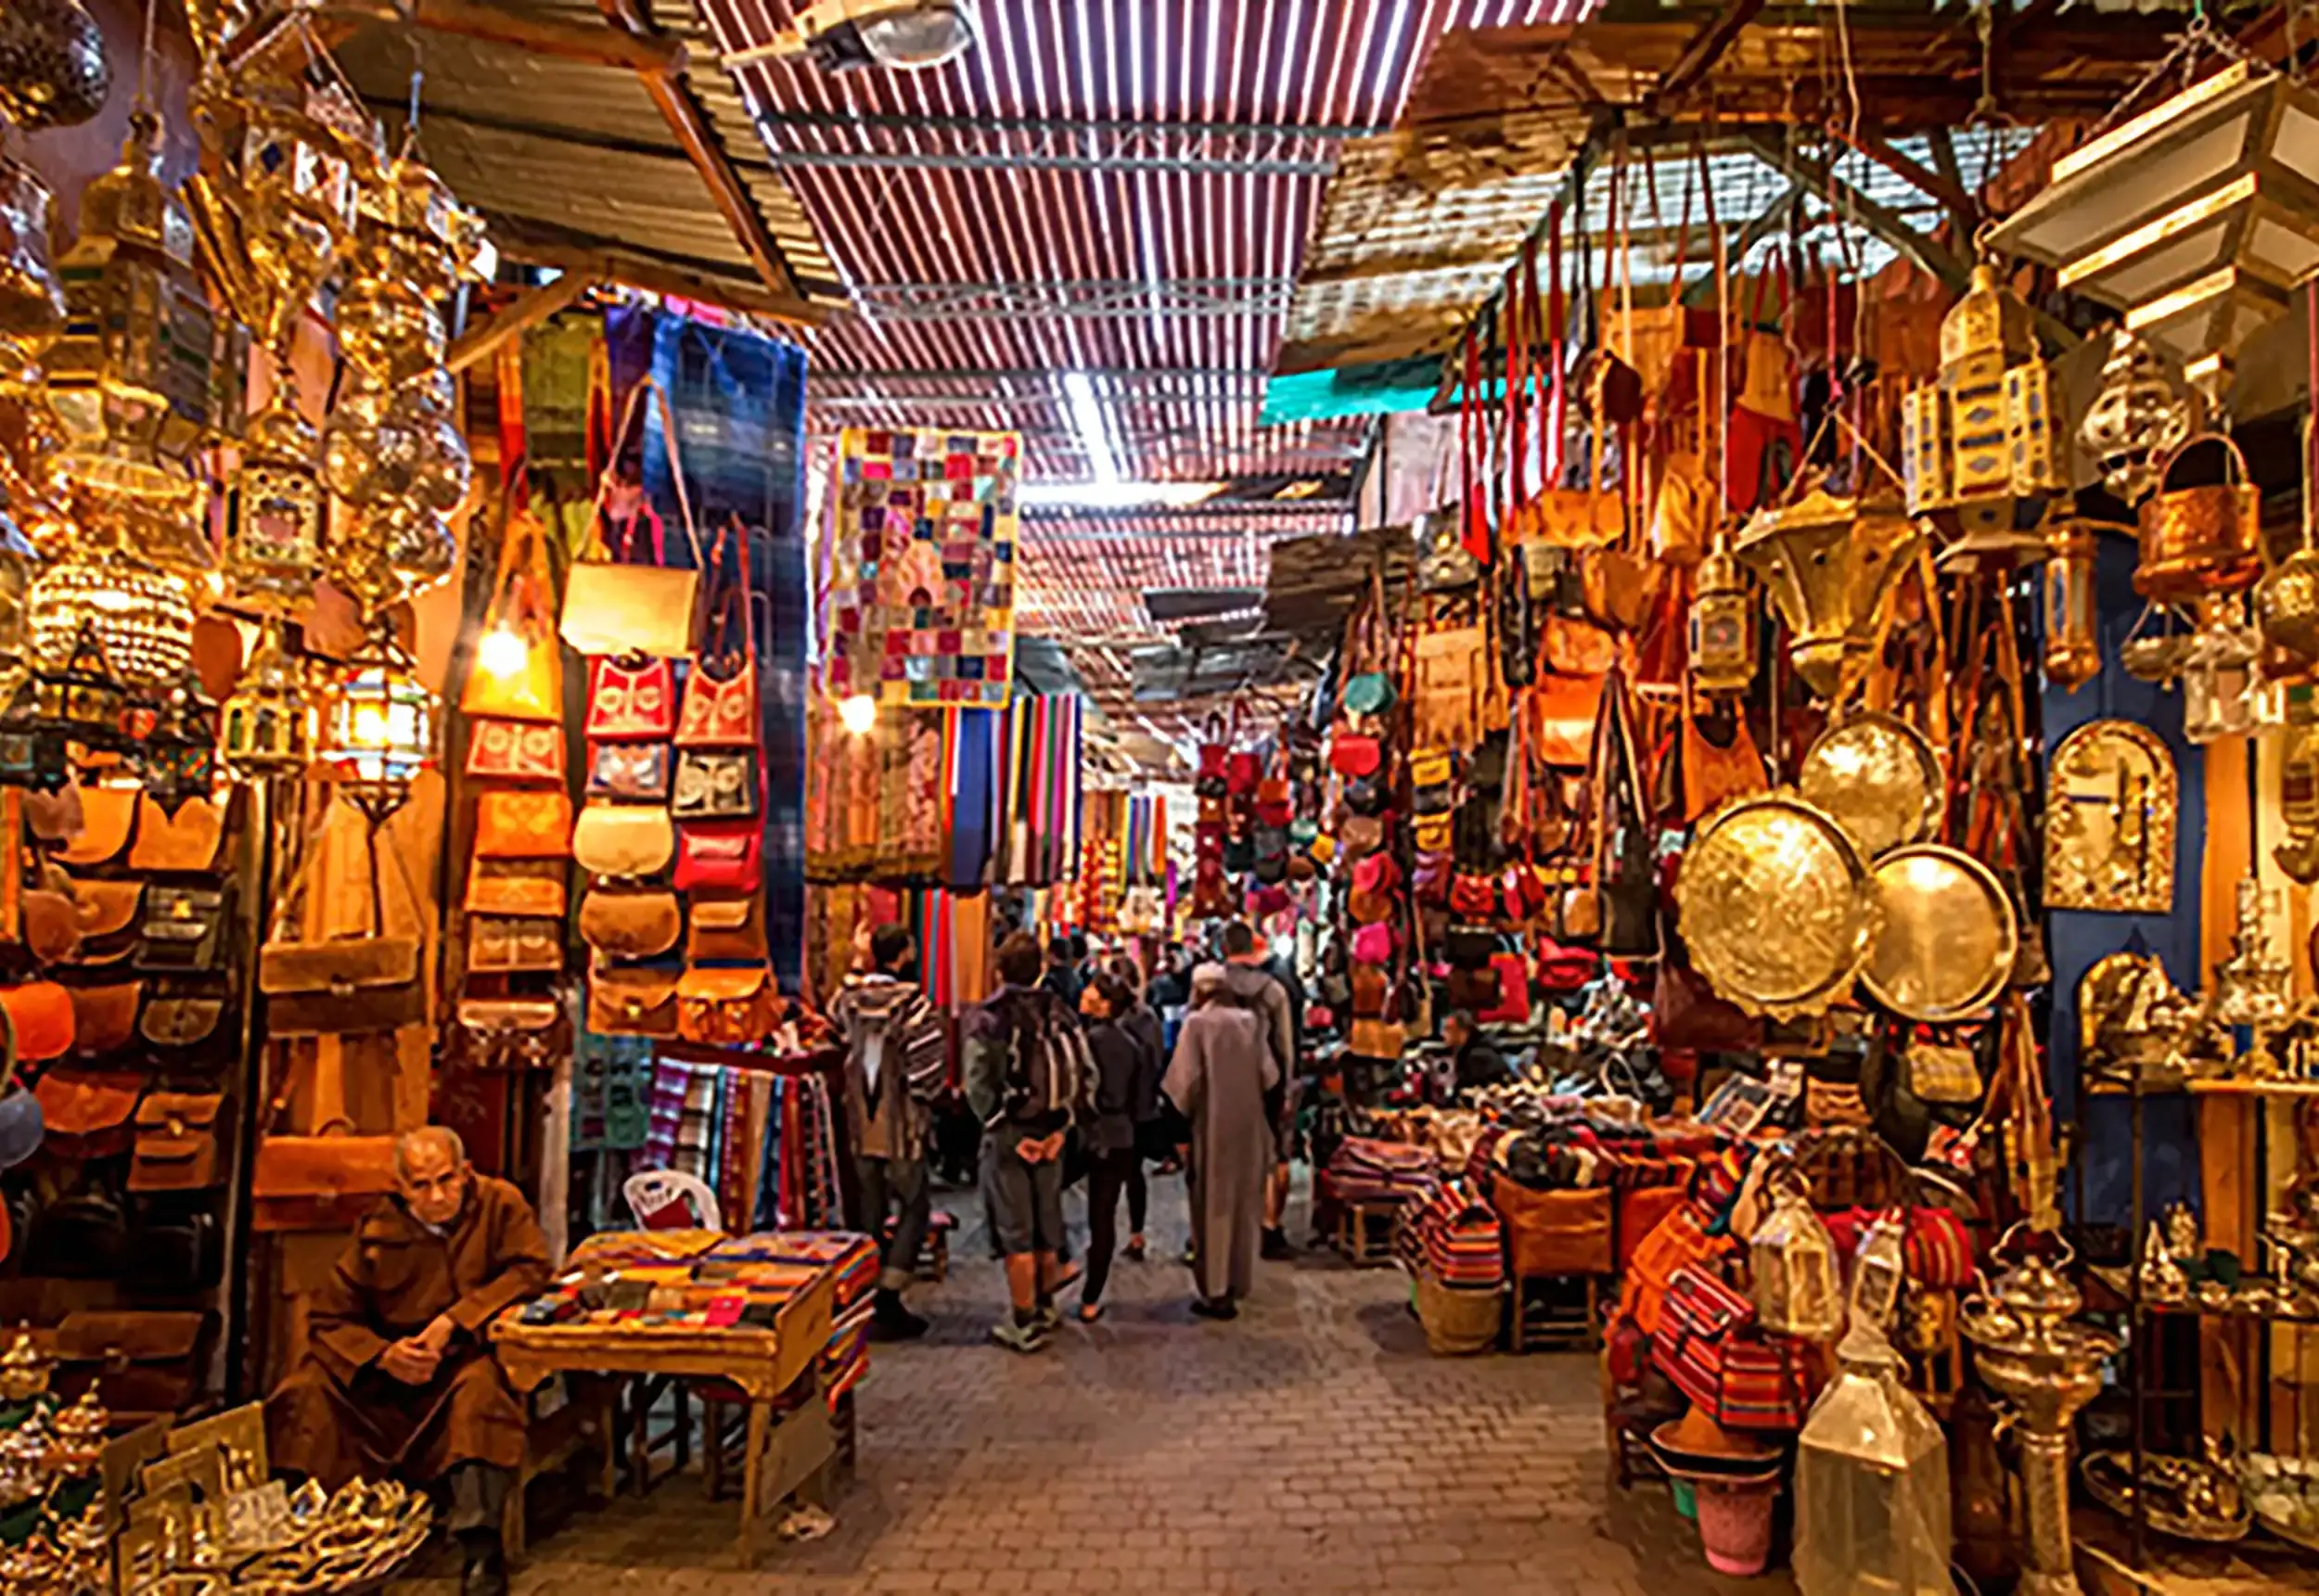 Visit the Artisan Souk, located just a ten-minute walk from our guesthouse.